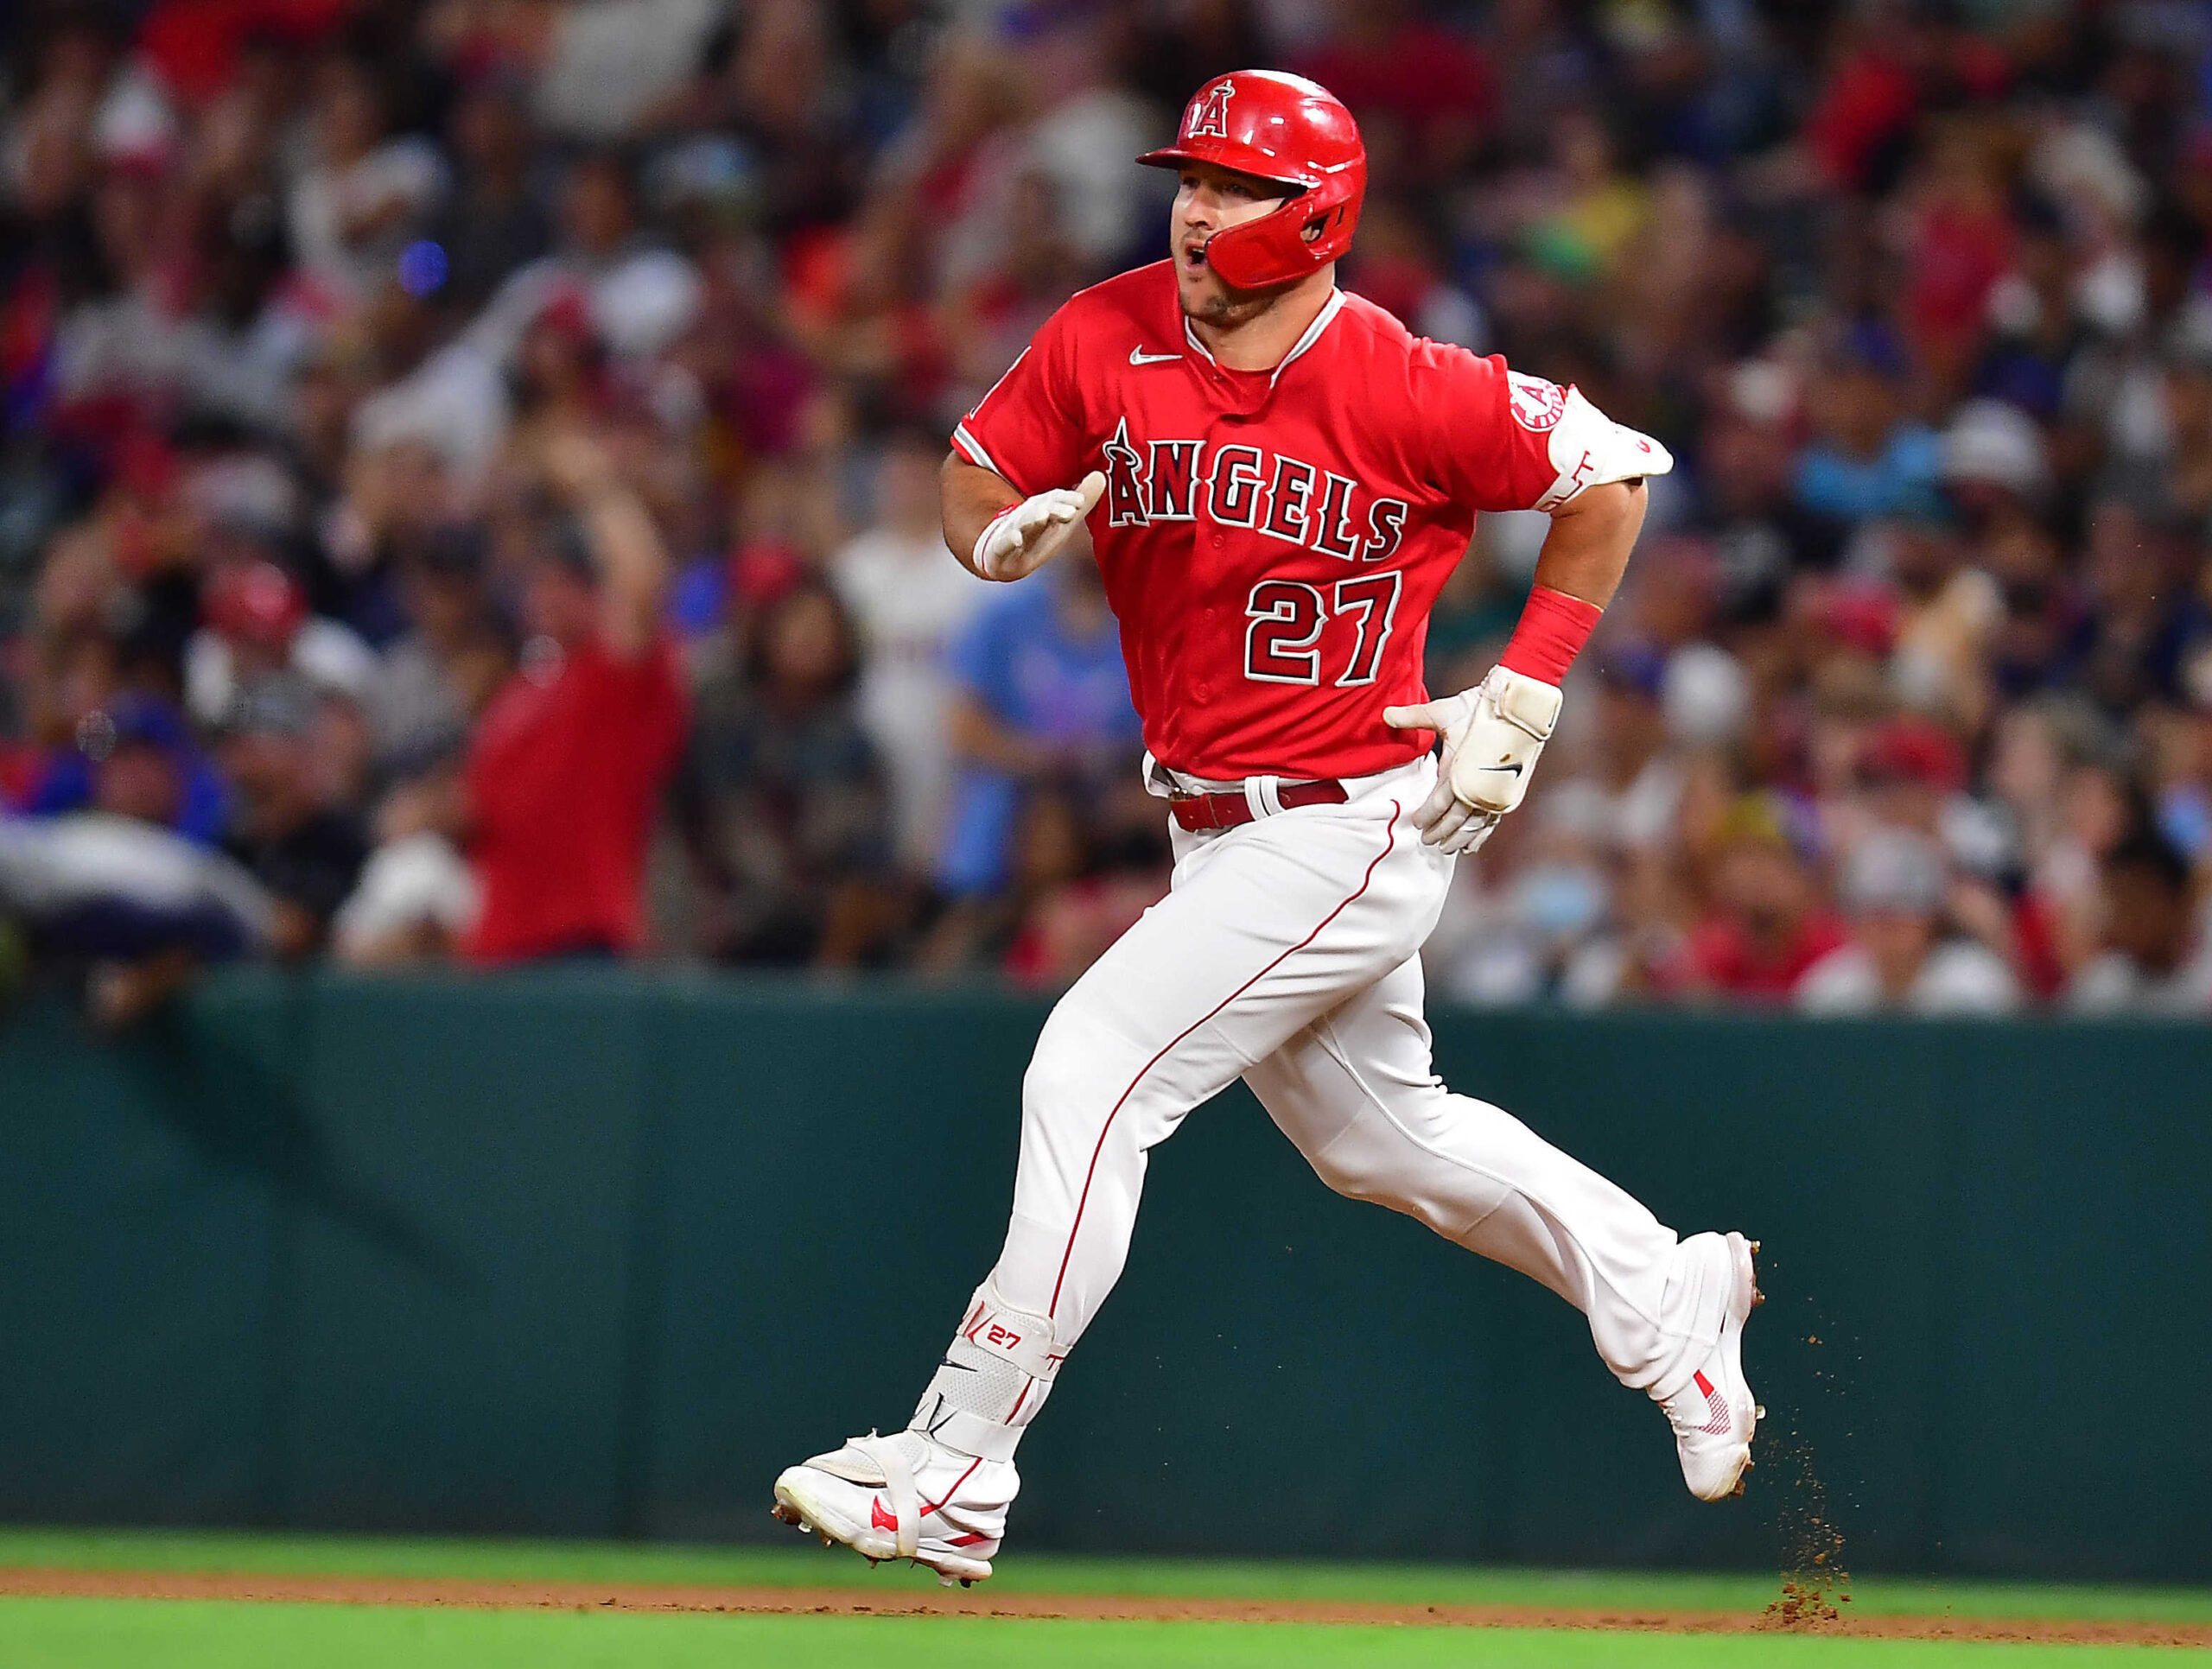 Angels News: Mike Trout Sets MLB Record As Youngest to 300 Home